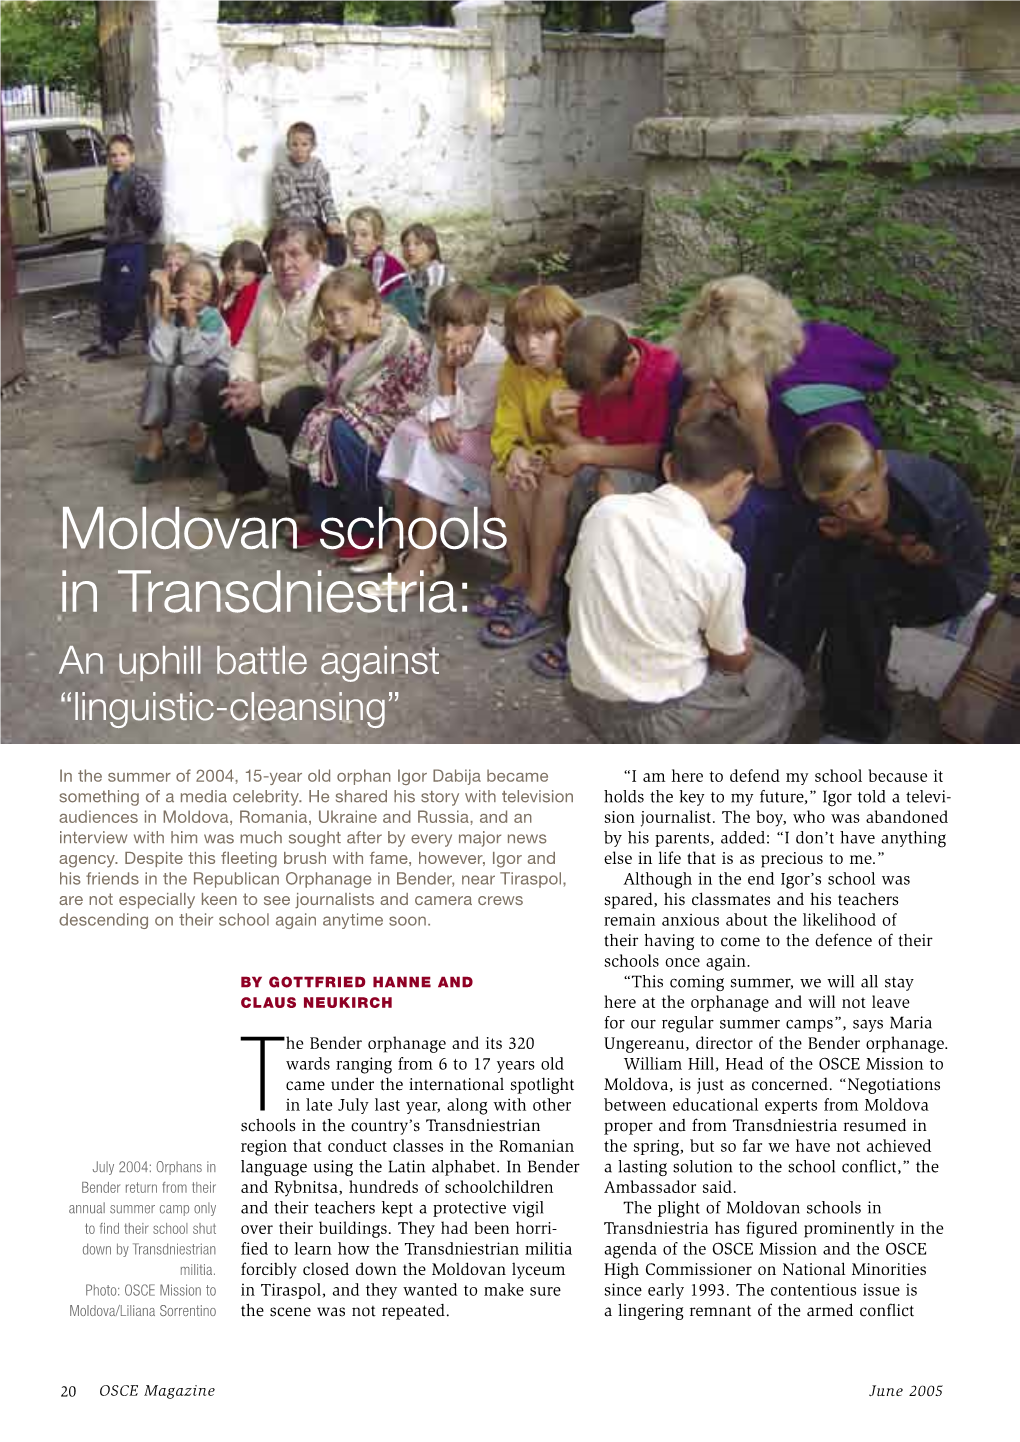 Moldovan Schools in Transdniestria: an Uphill Battle Against “Linguistic-Cleansing”